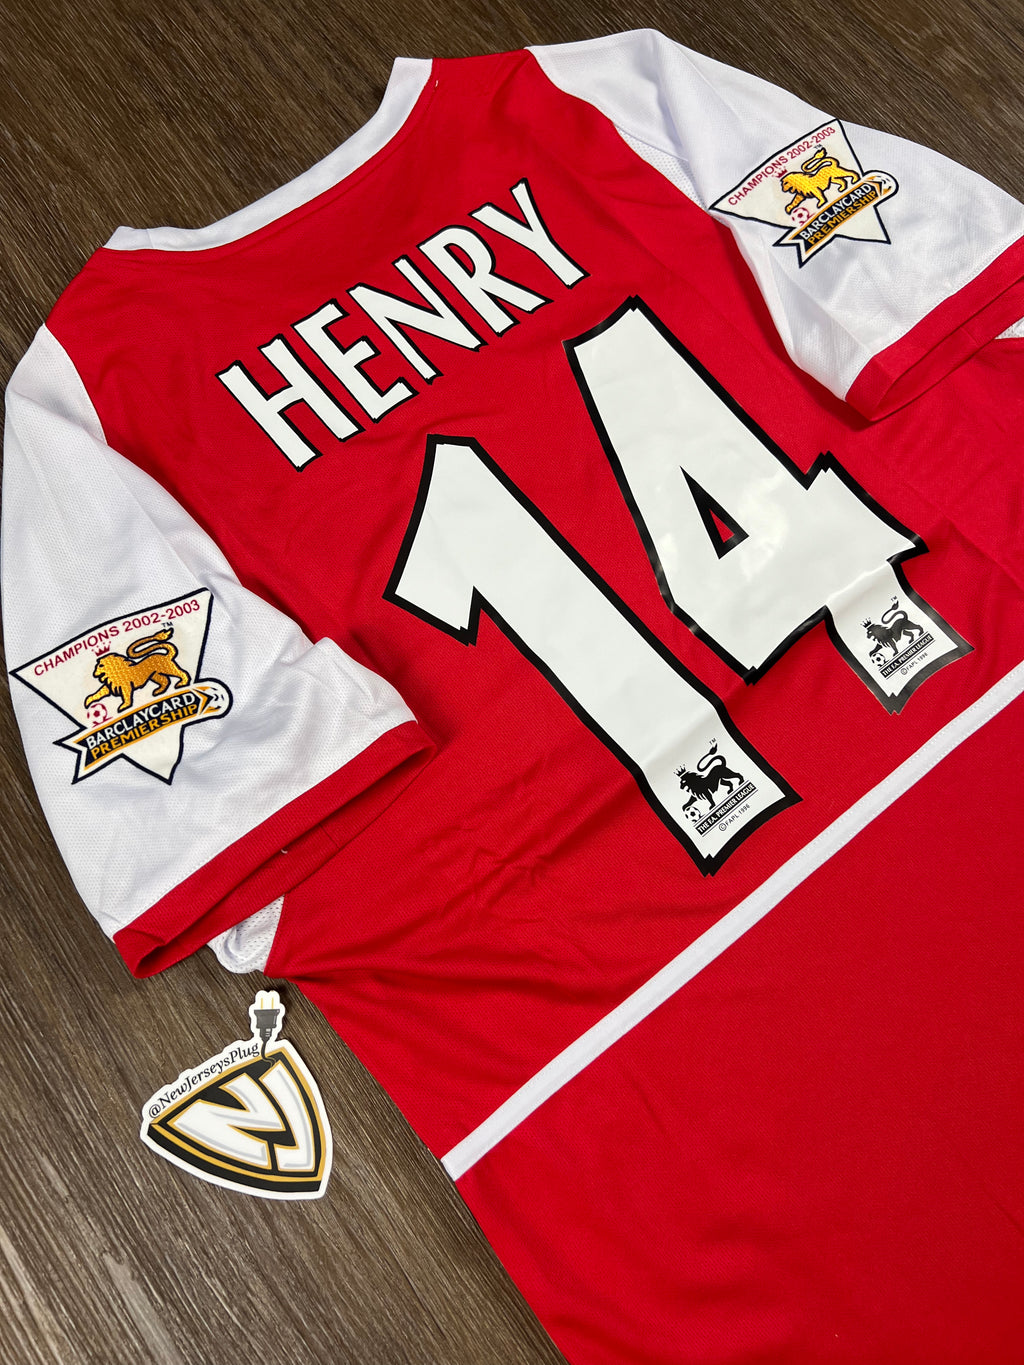 03/04 Arsenal Thierry Henry 14 Home Jersey